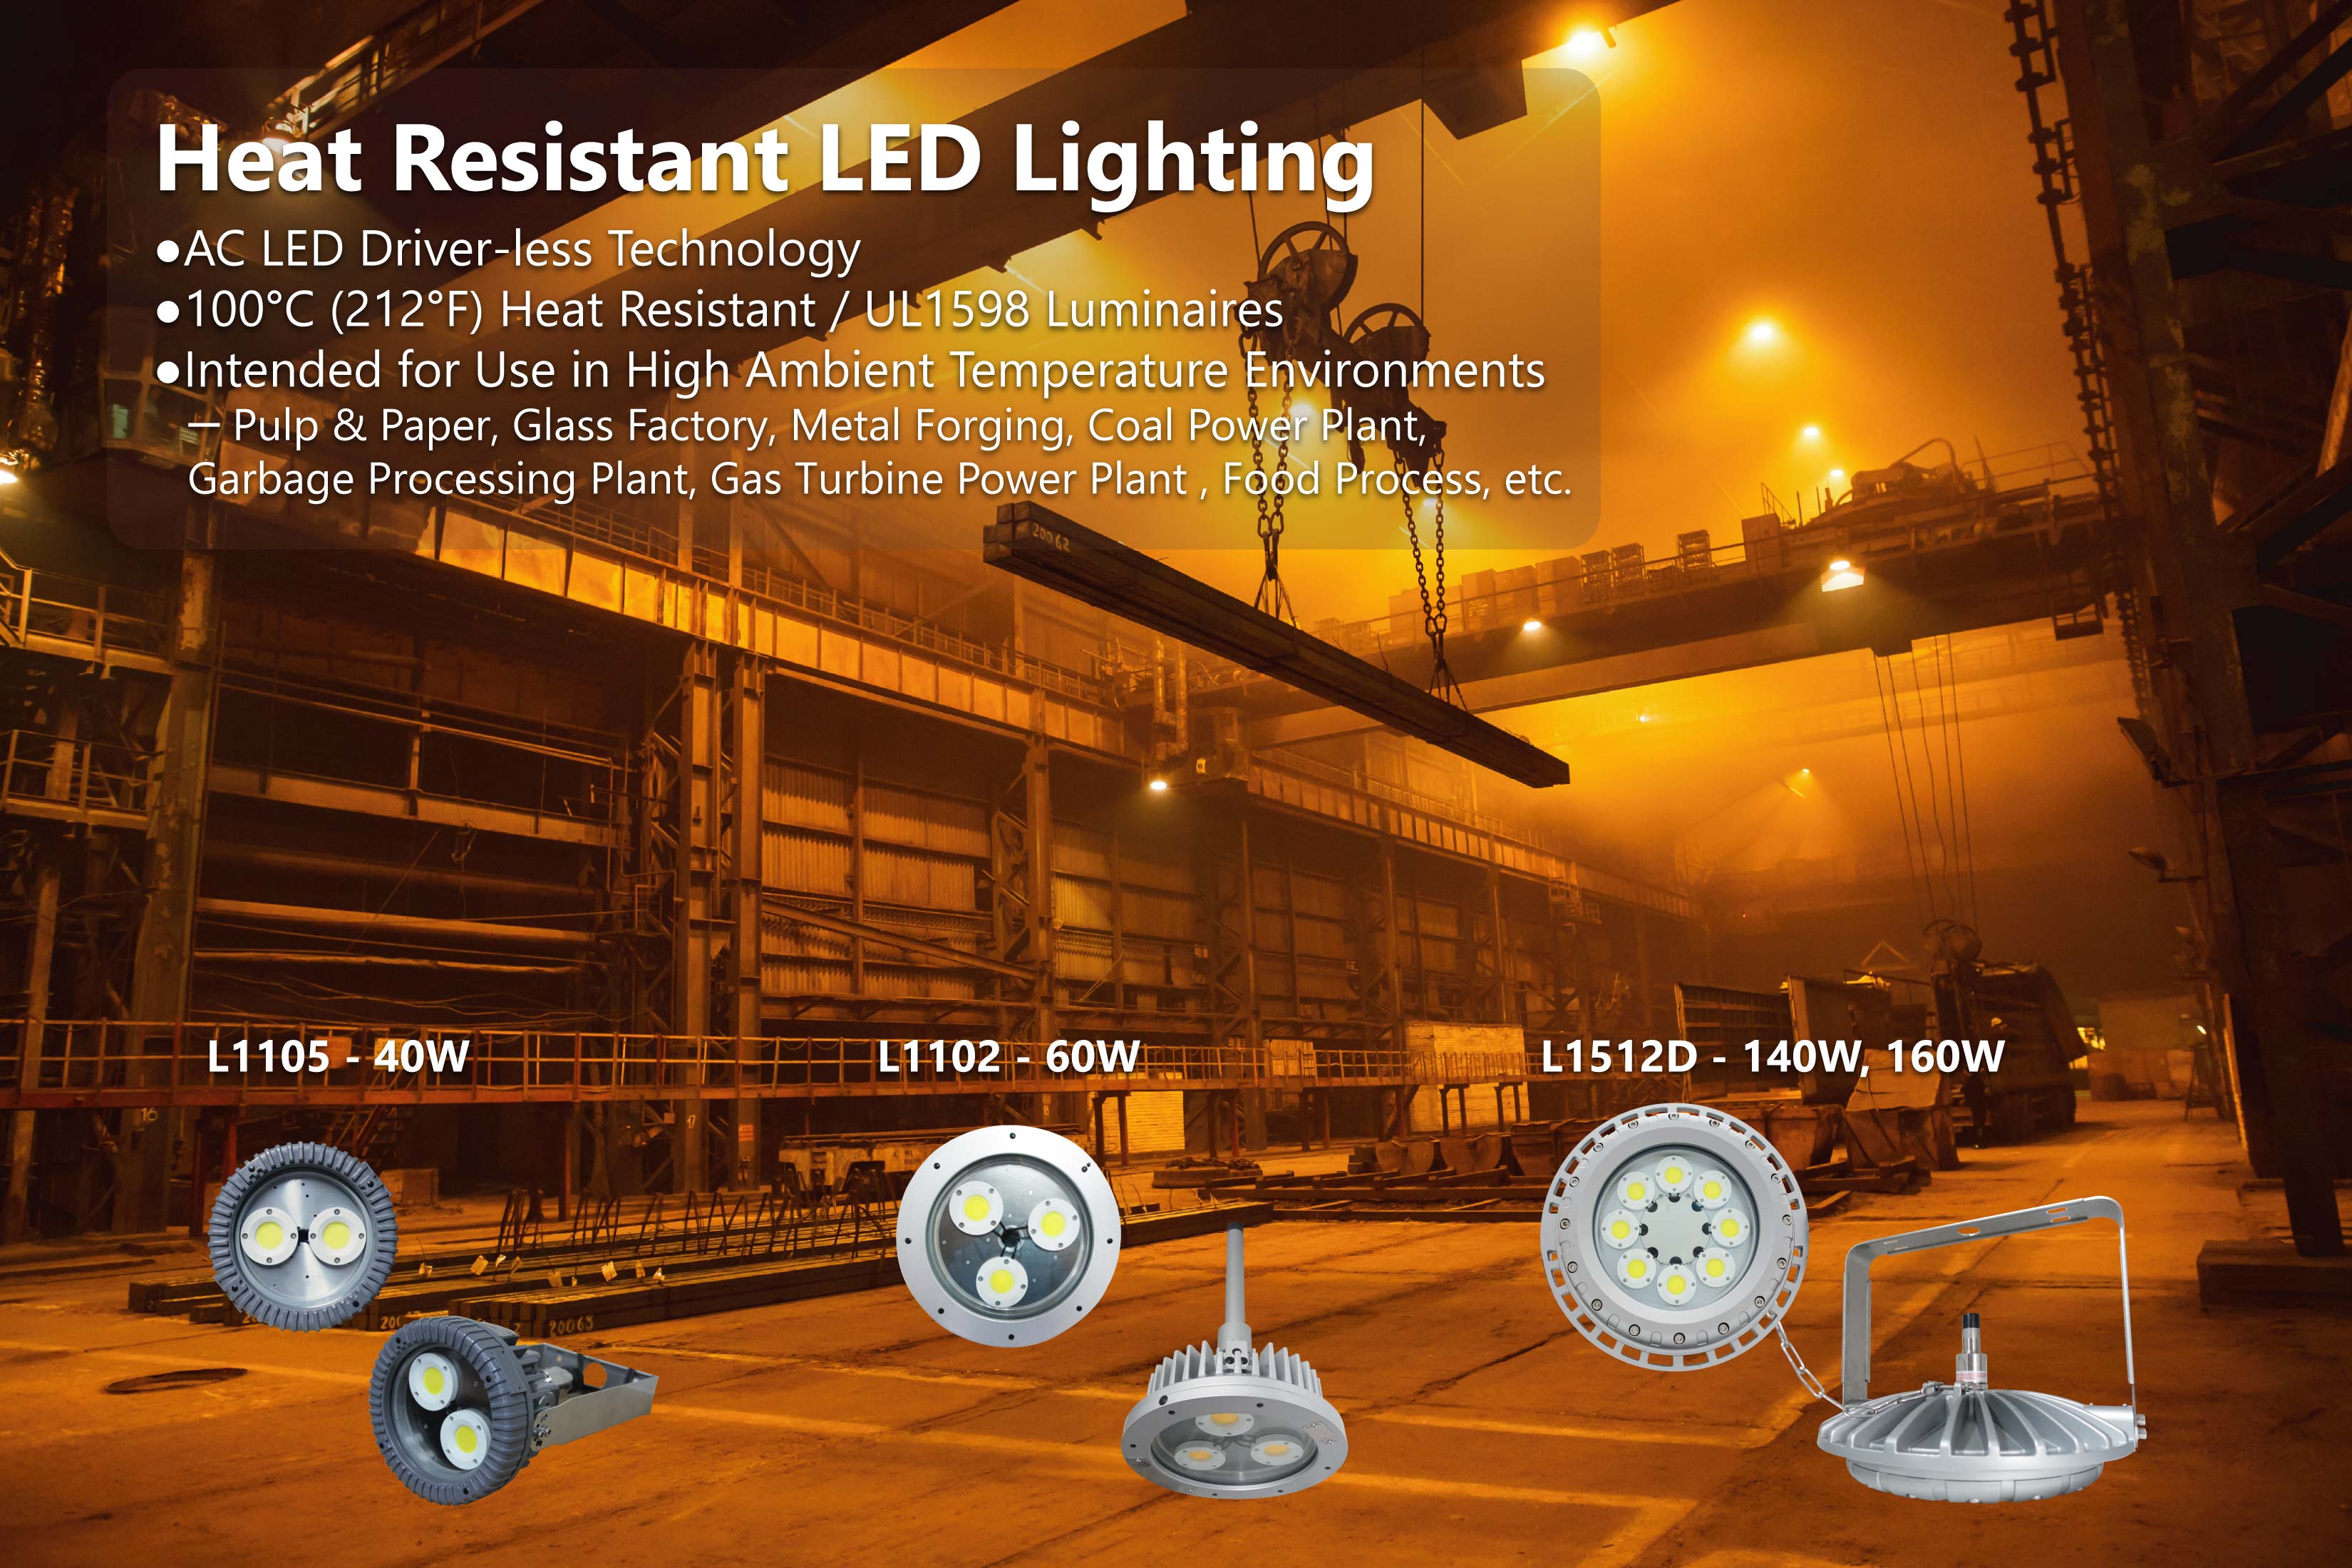 The World's First Driver-less LED Lighting with the advantage of 100°C Heat Resistant!